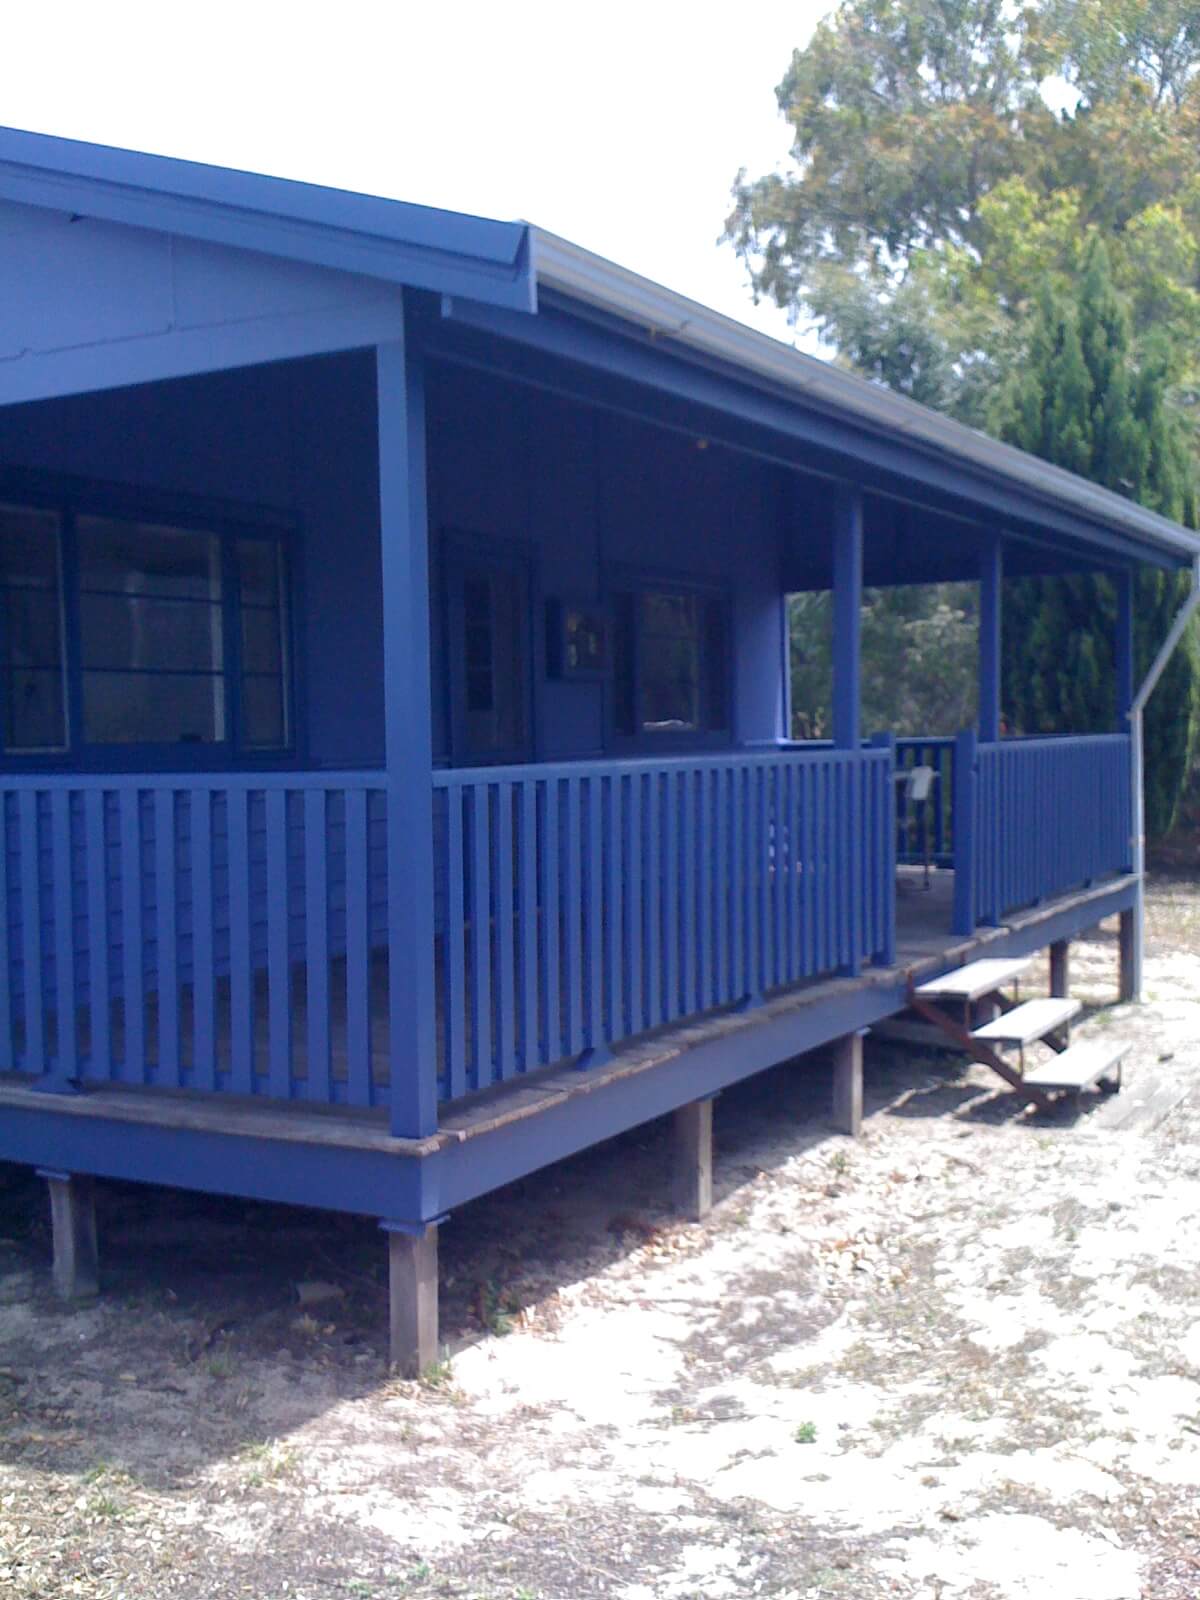 Weekender - Accommodation in Bremer Bay - 21 Barbara Street. Great verandah with a dining area and BBQ - great space for a glass of wine